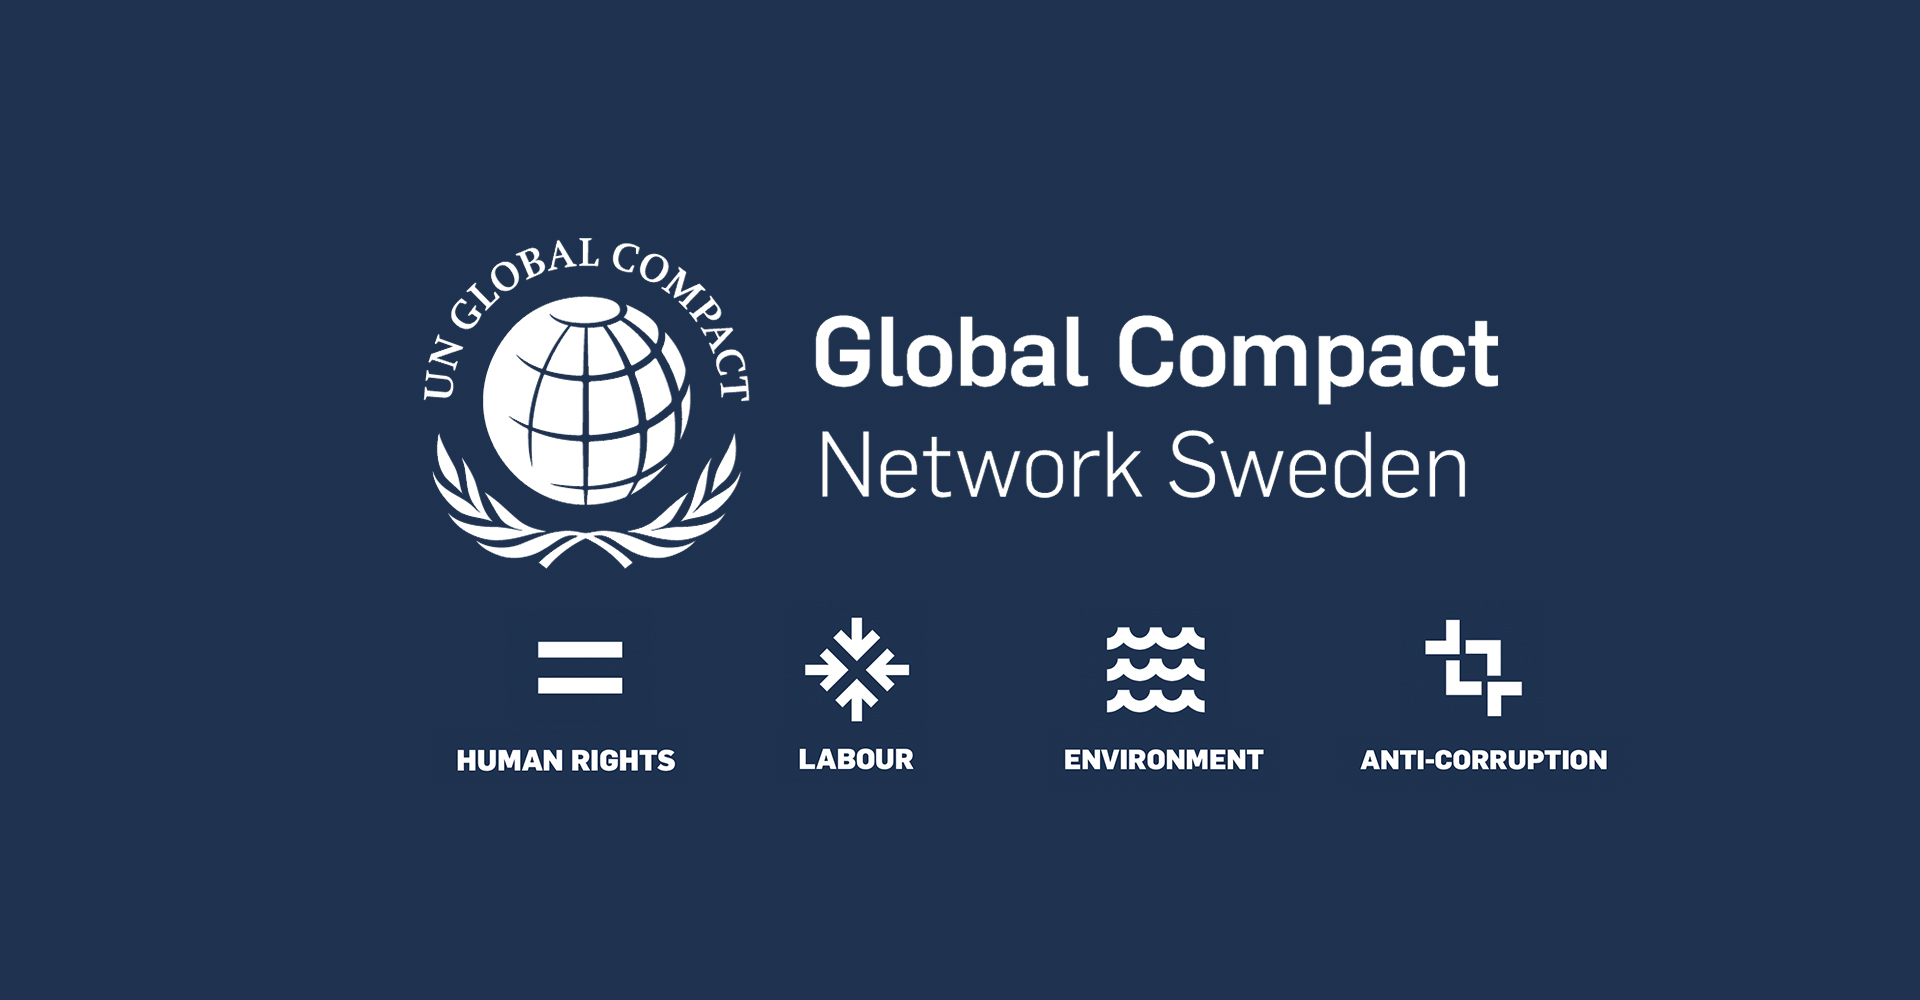 Global compact network sweden